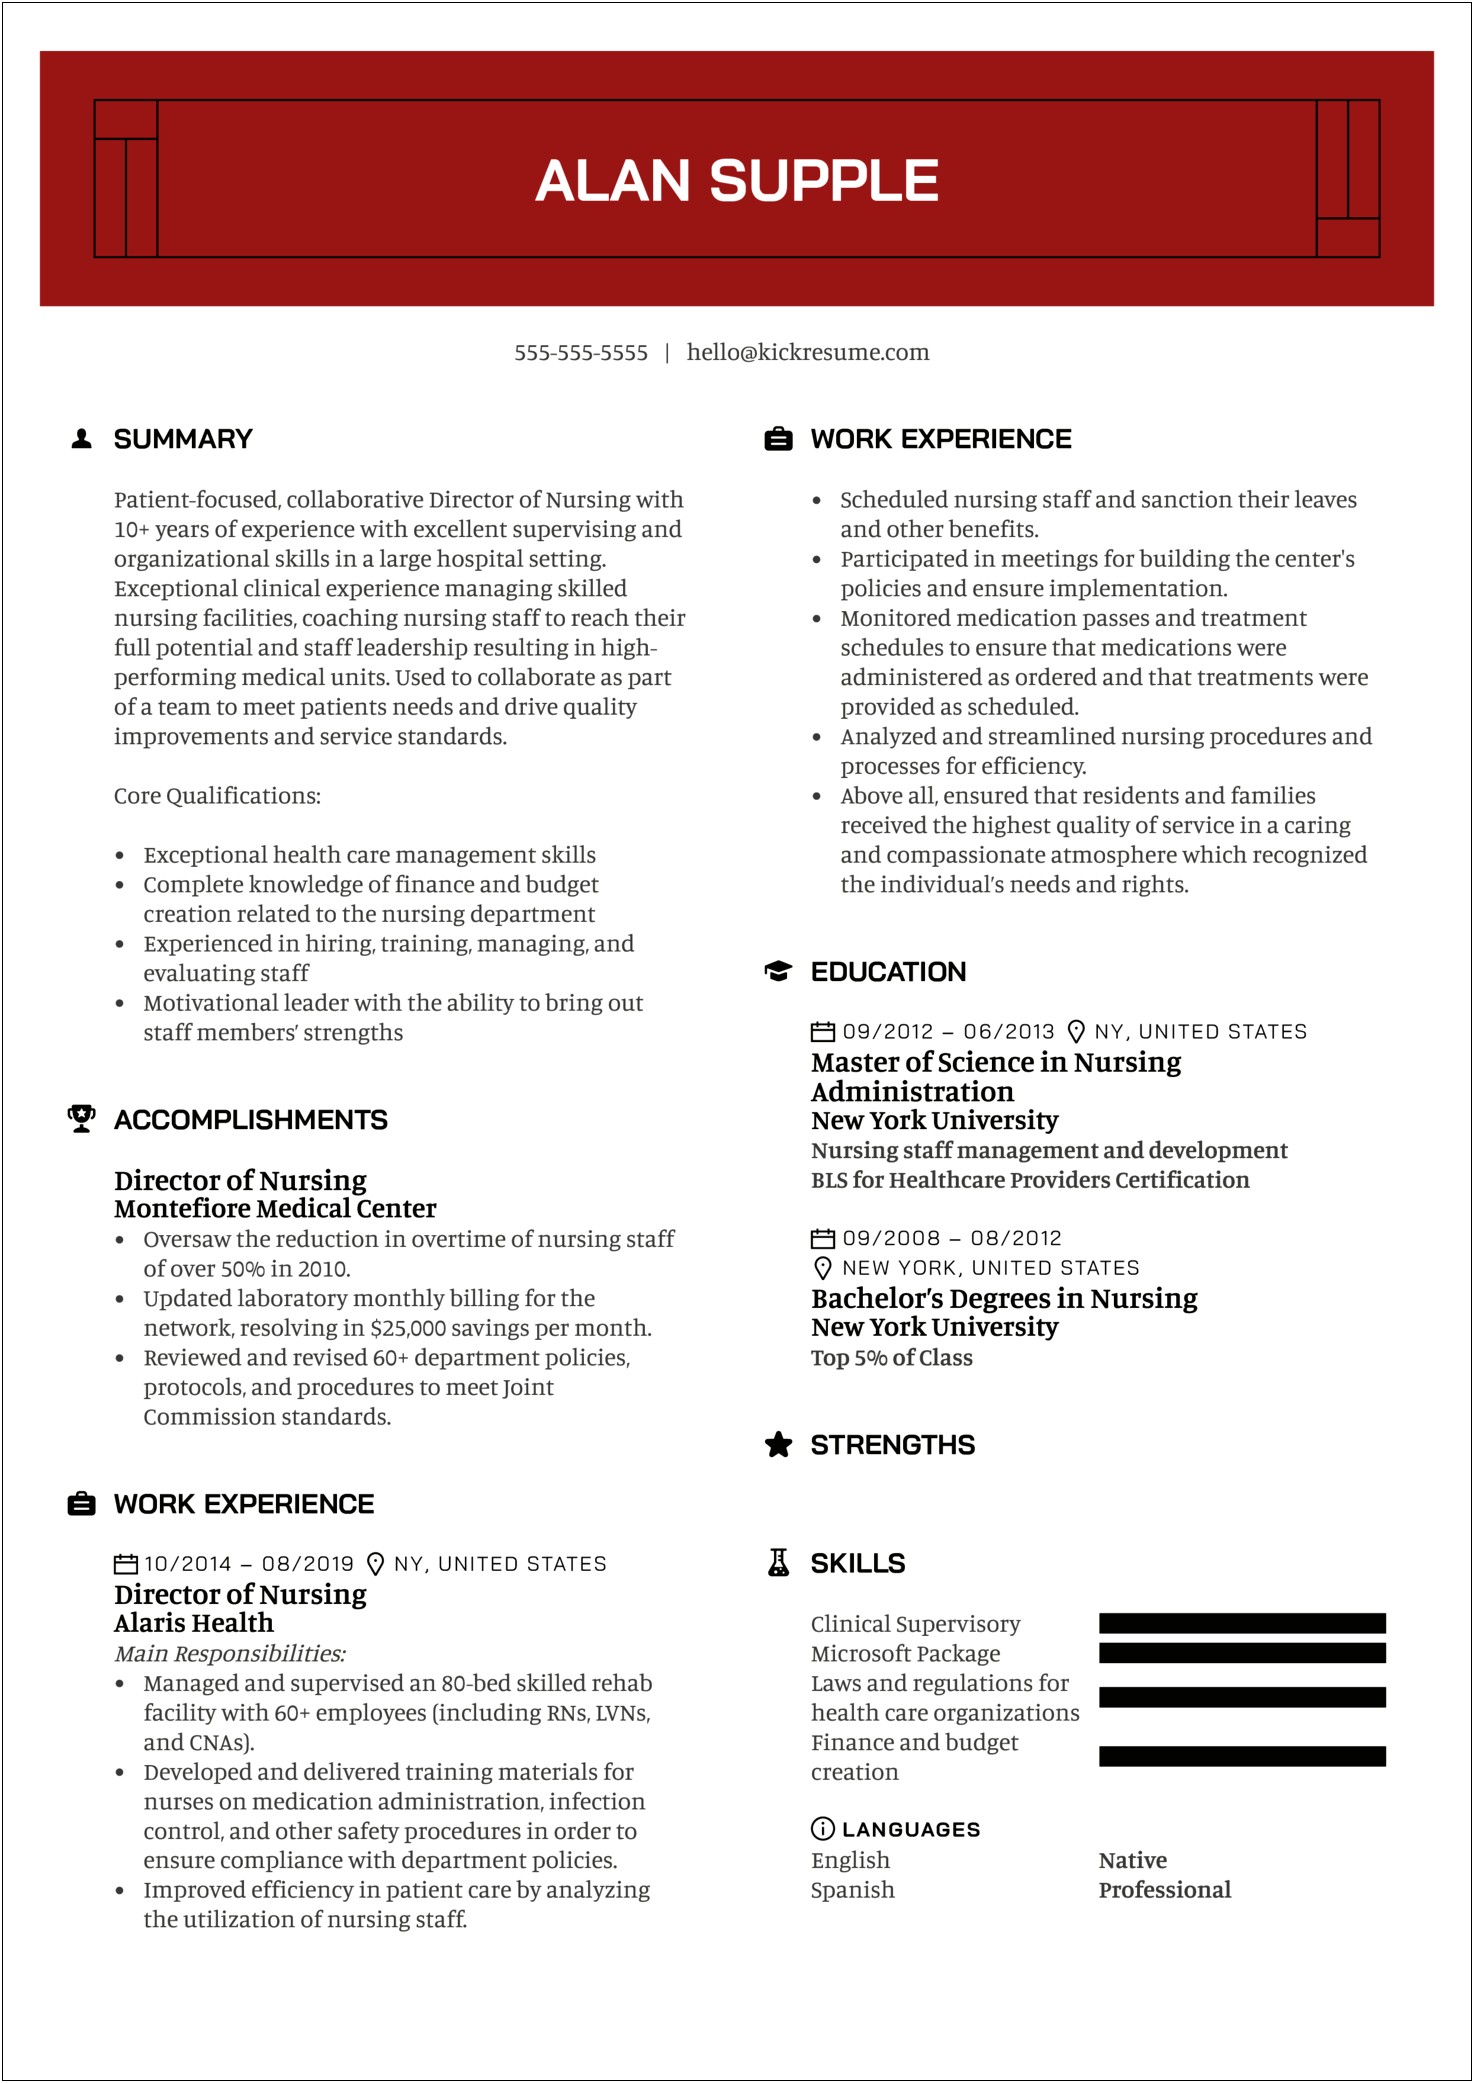 Resume For Nurse Manager Position